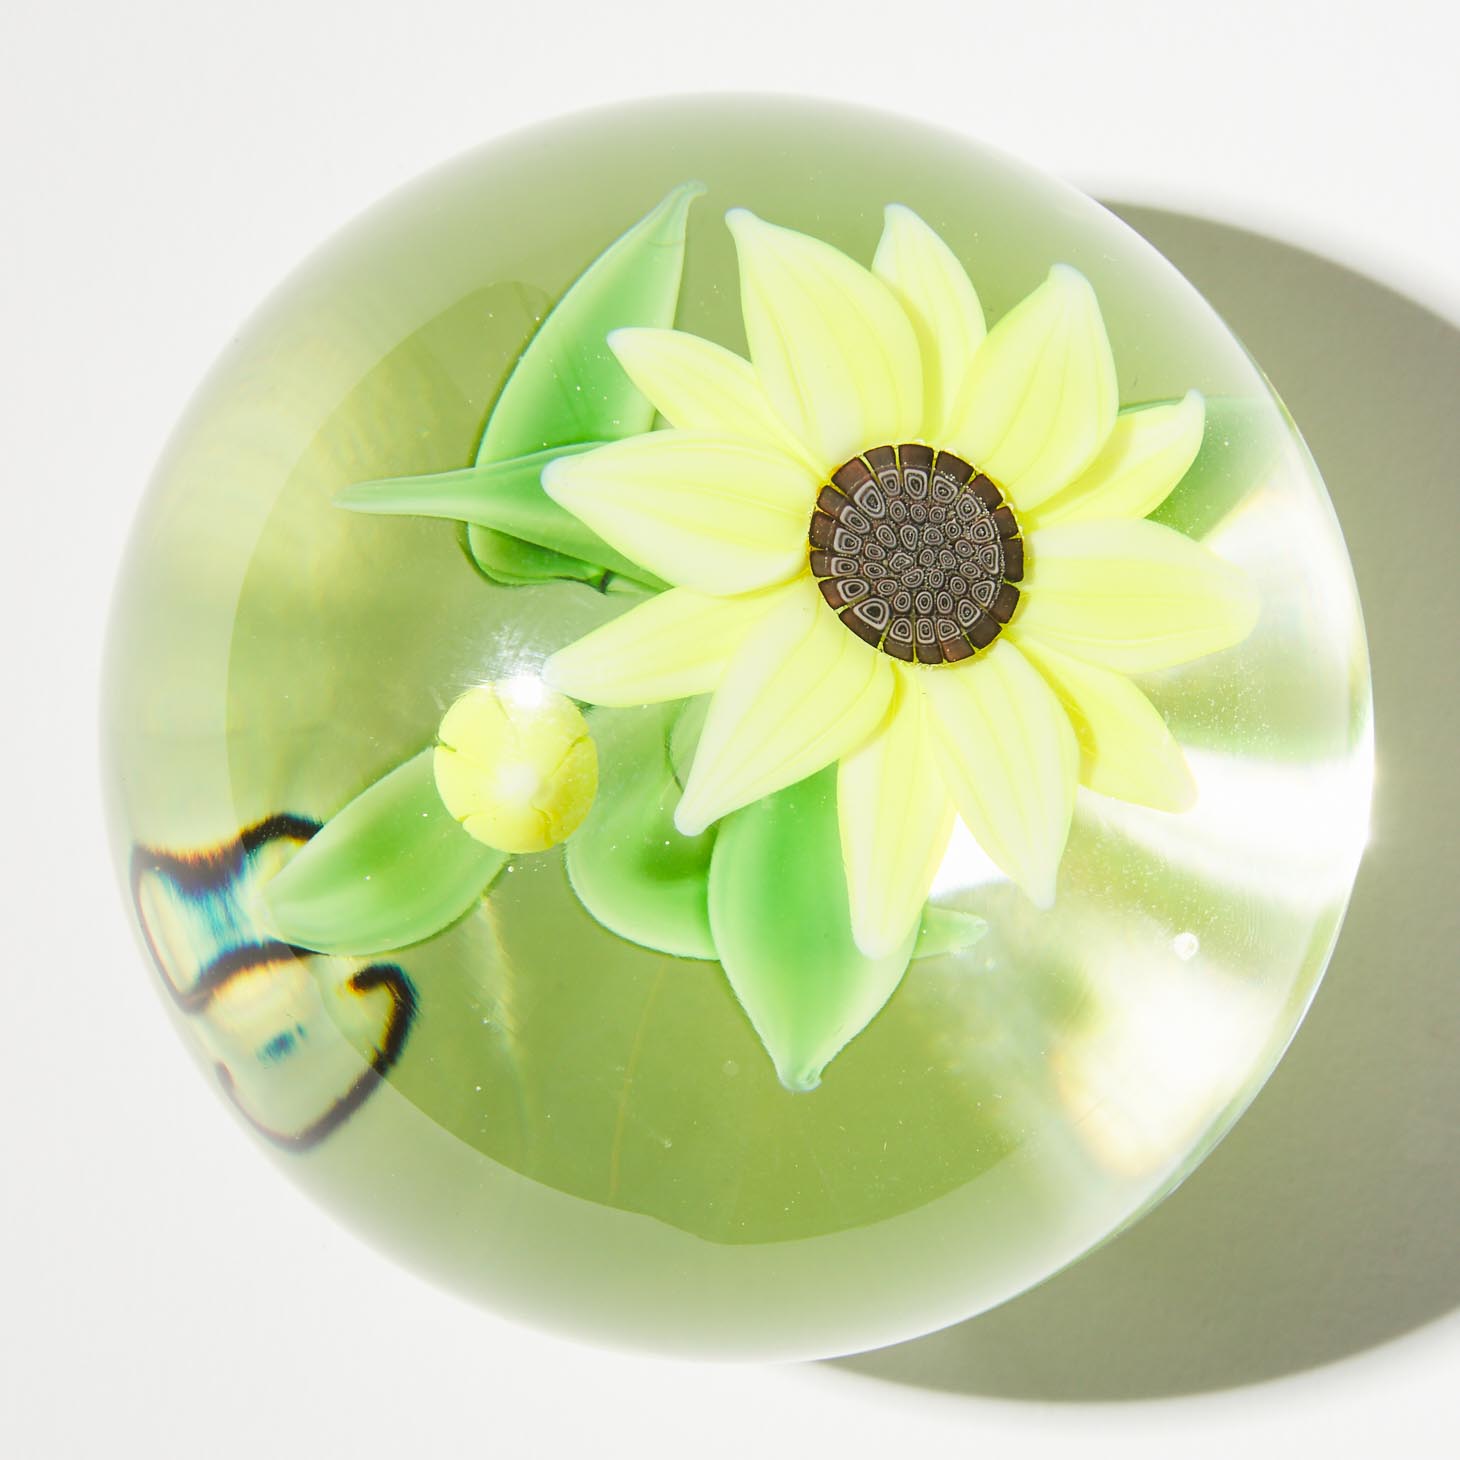 Bruce Sillars (American), Black-Eyed Susan Paperweight, Orient & Flume, 17/250, late 20th century